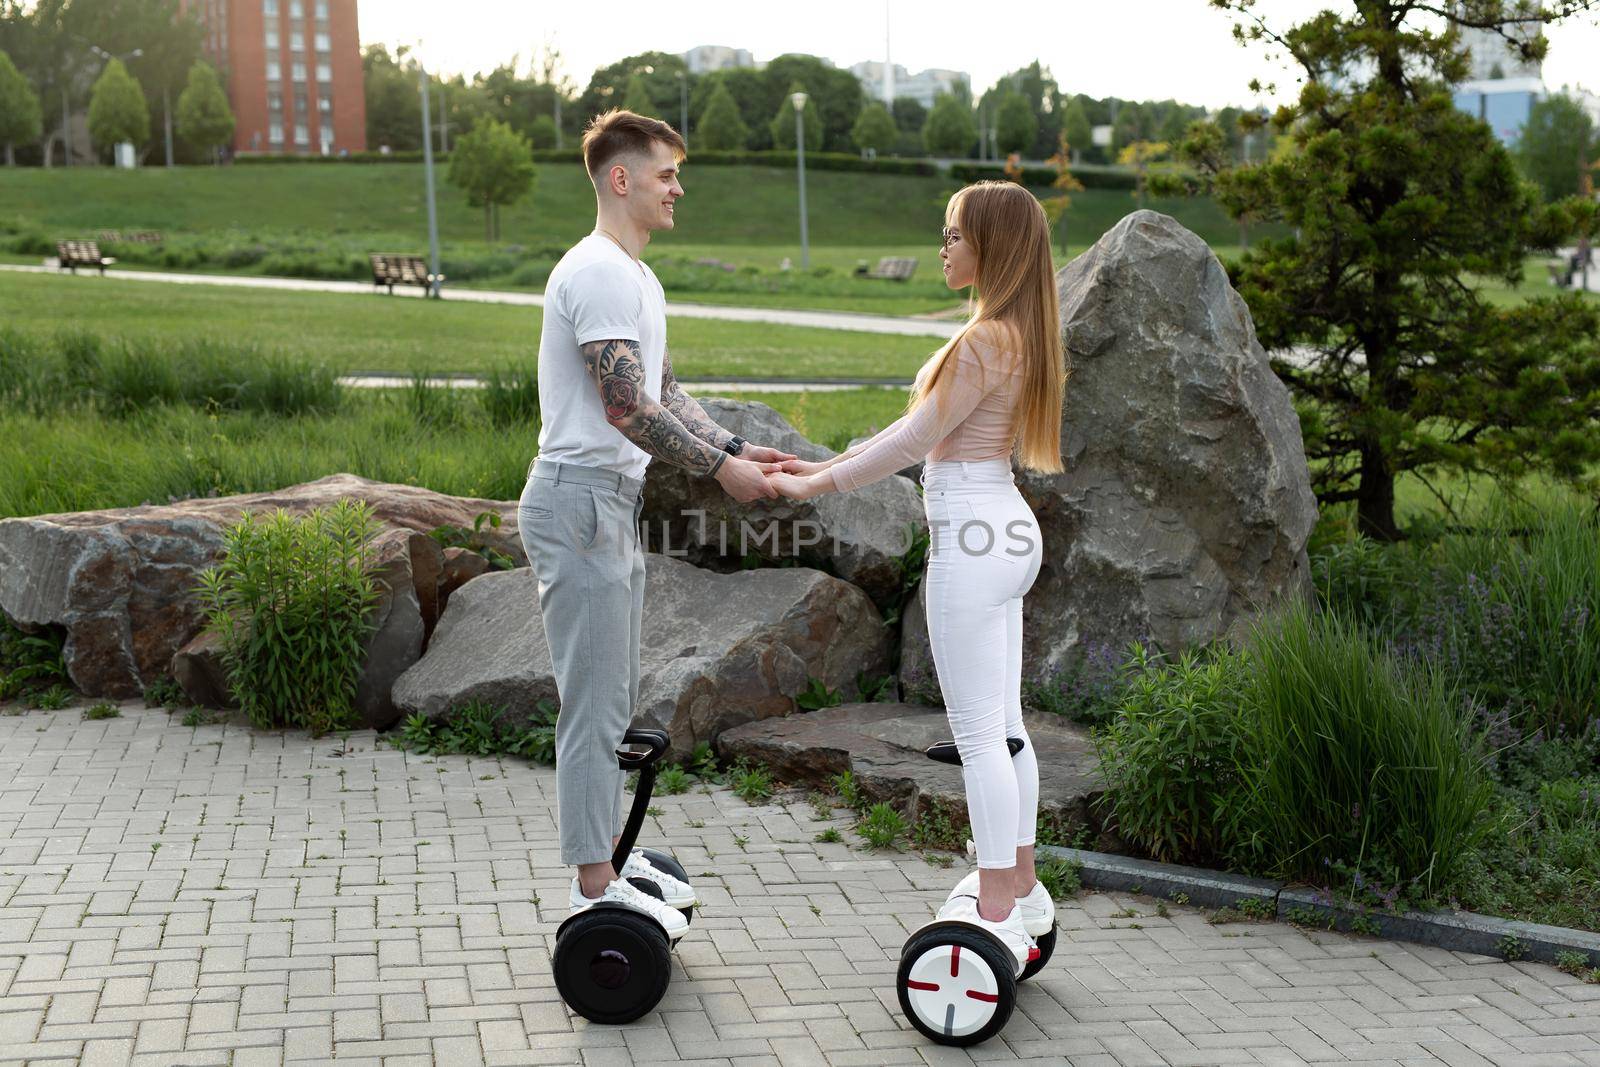 Young man and woman riding on the hoverboard in the park. by StudioPeace